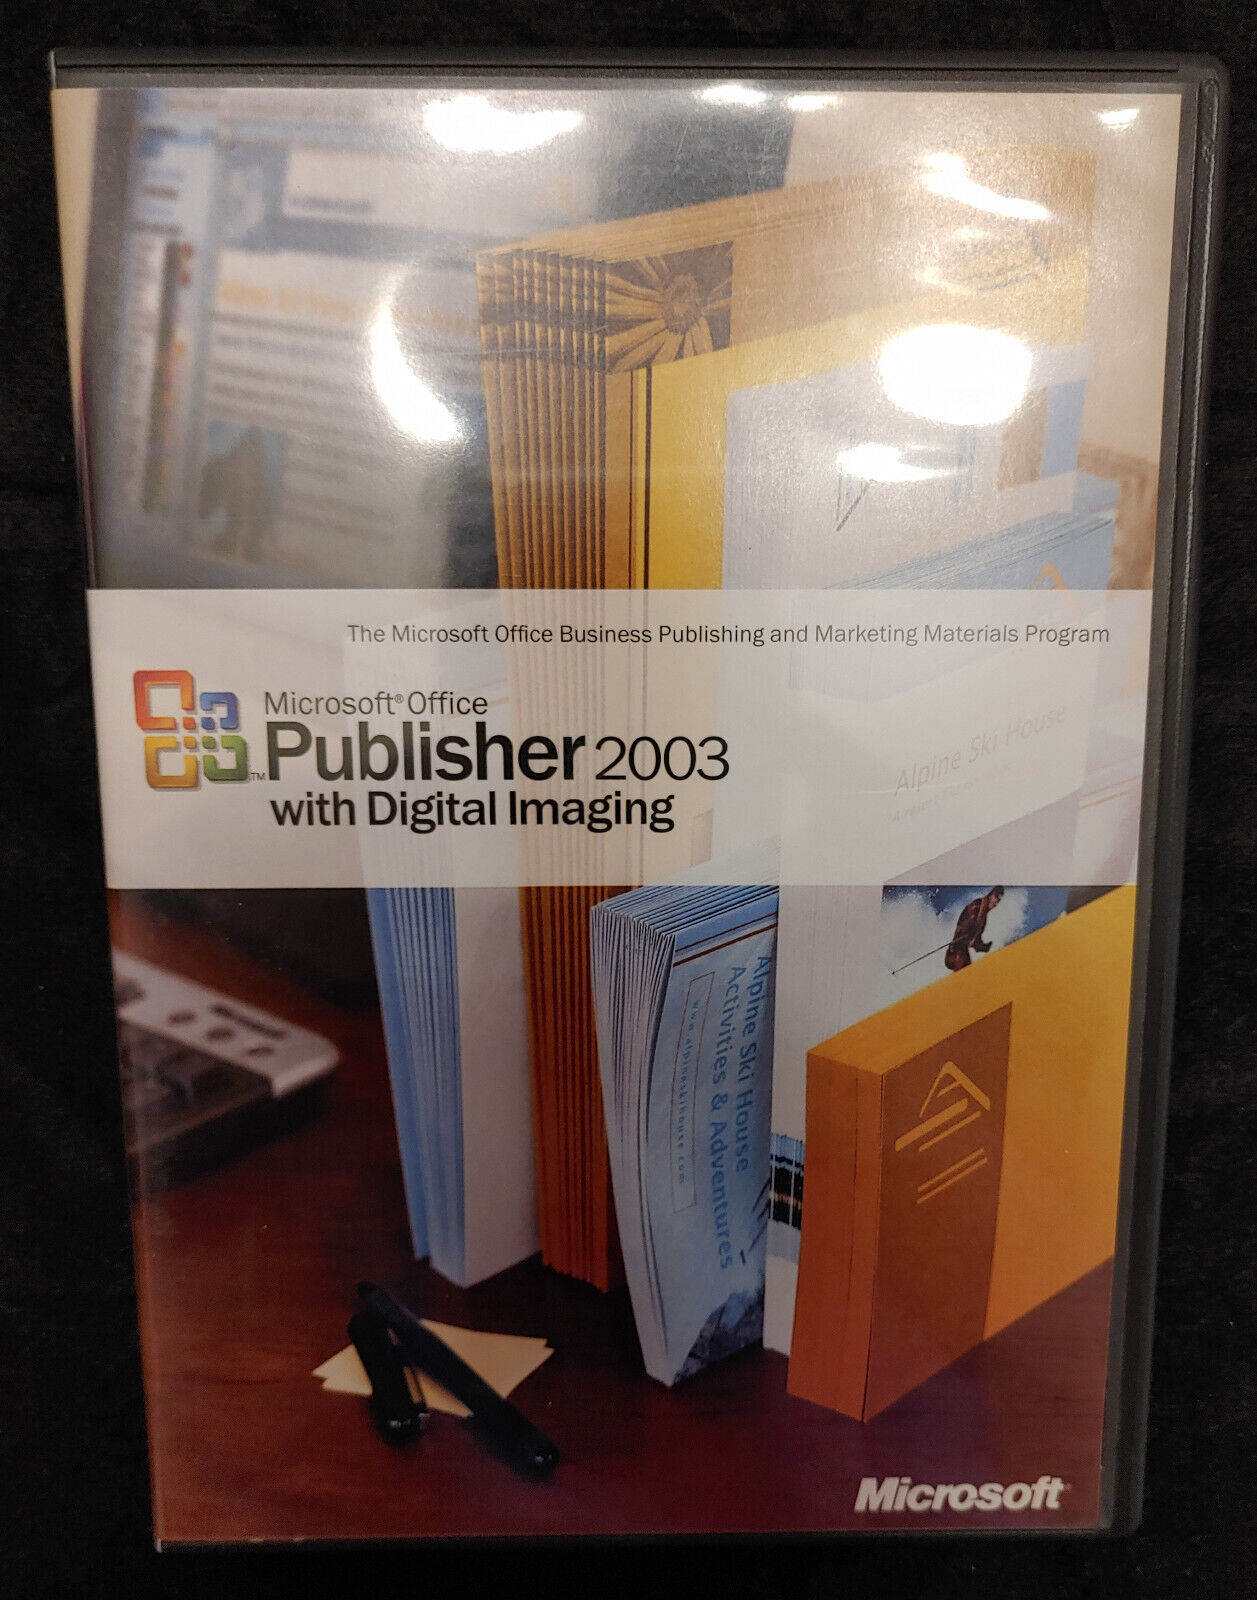 Microsoft Office Publisher 2003 with Digital Imaging